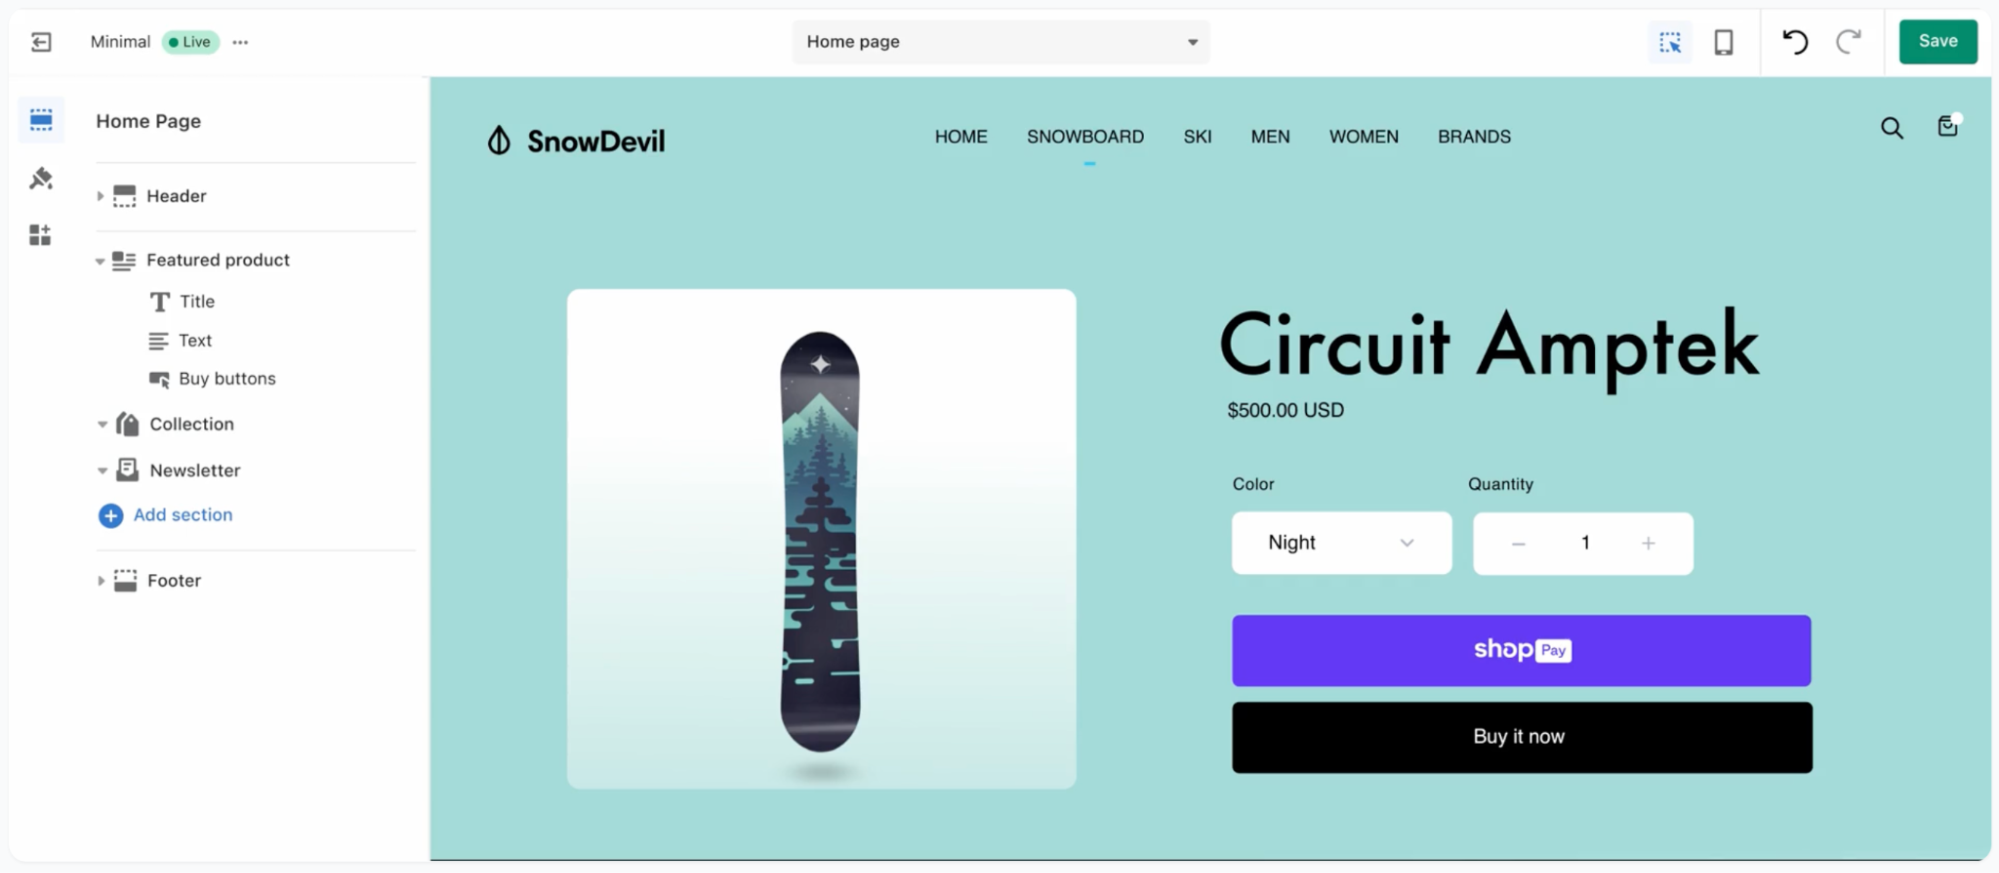 Shopify store builder showing a product page with a blue background, image of a snowboard, and buy button.